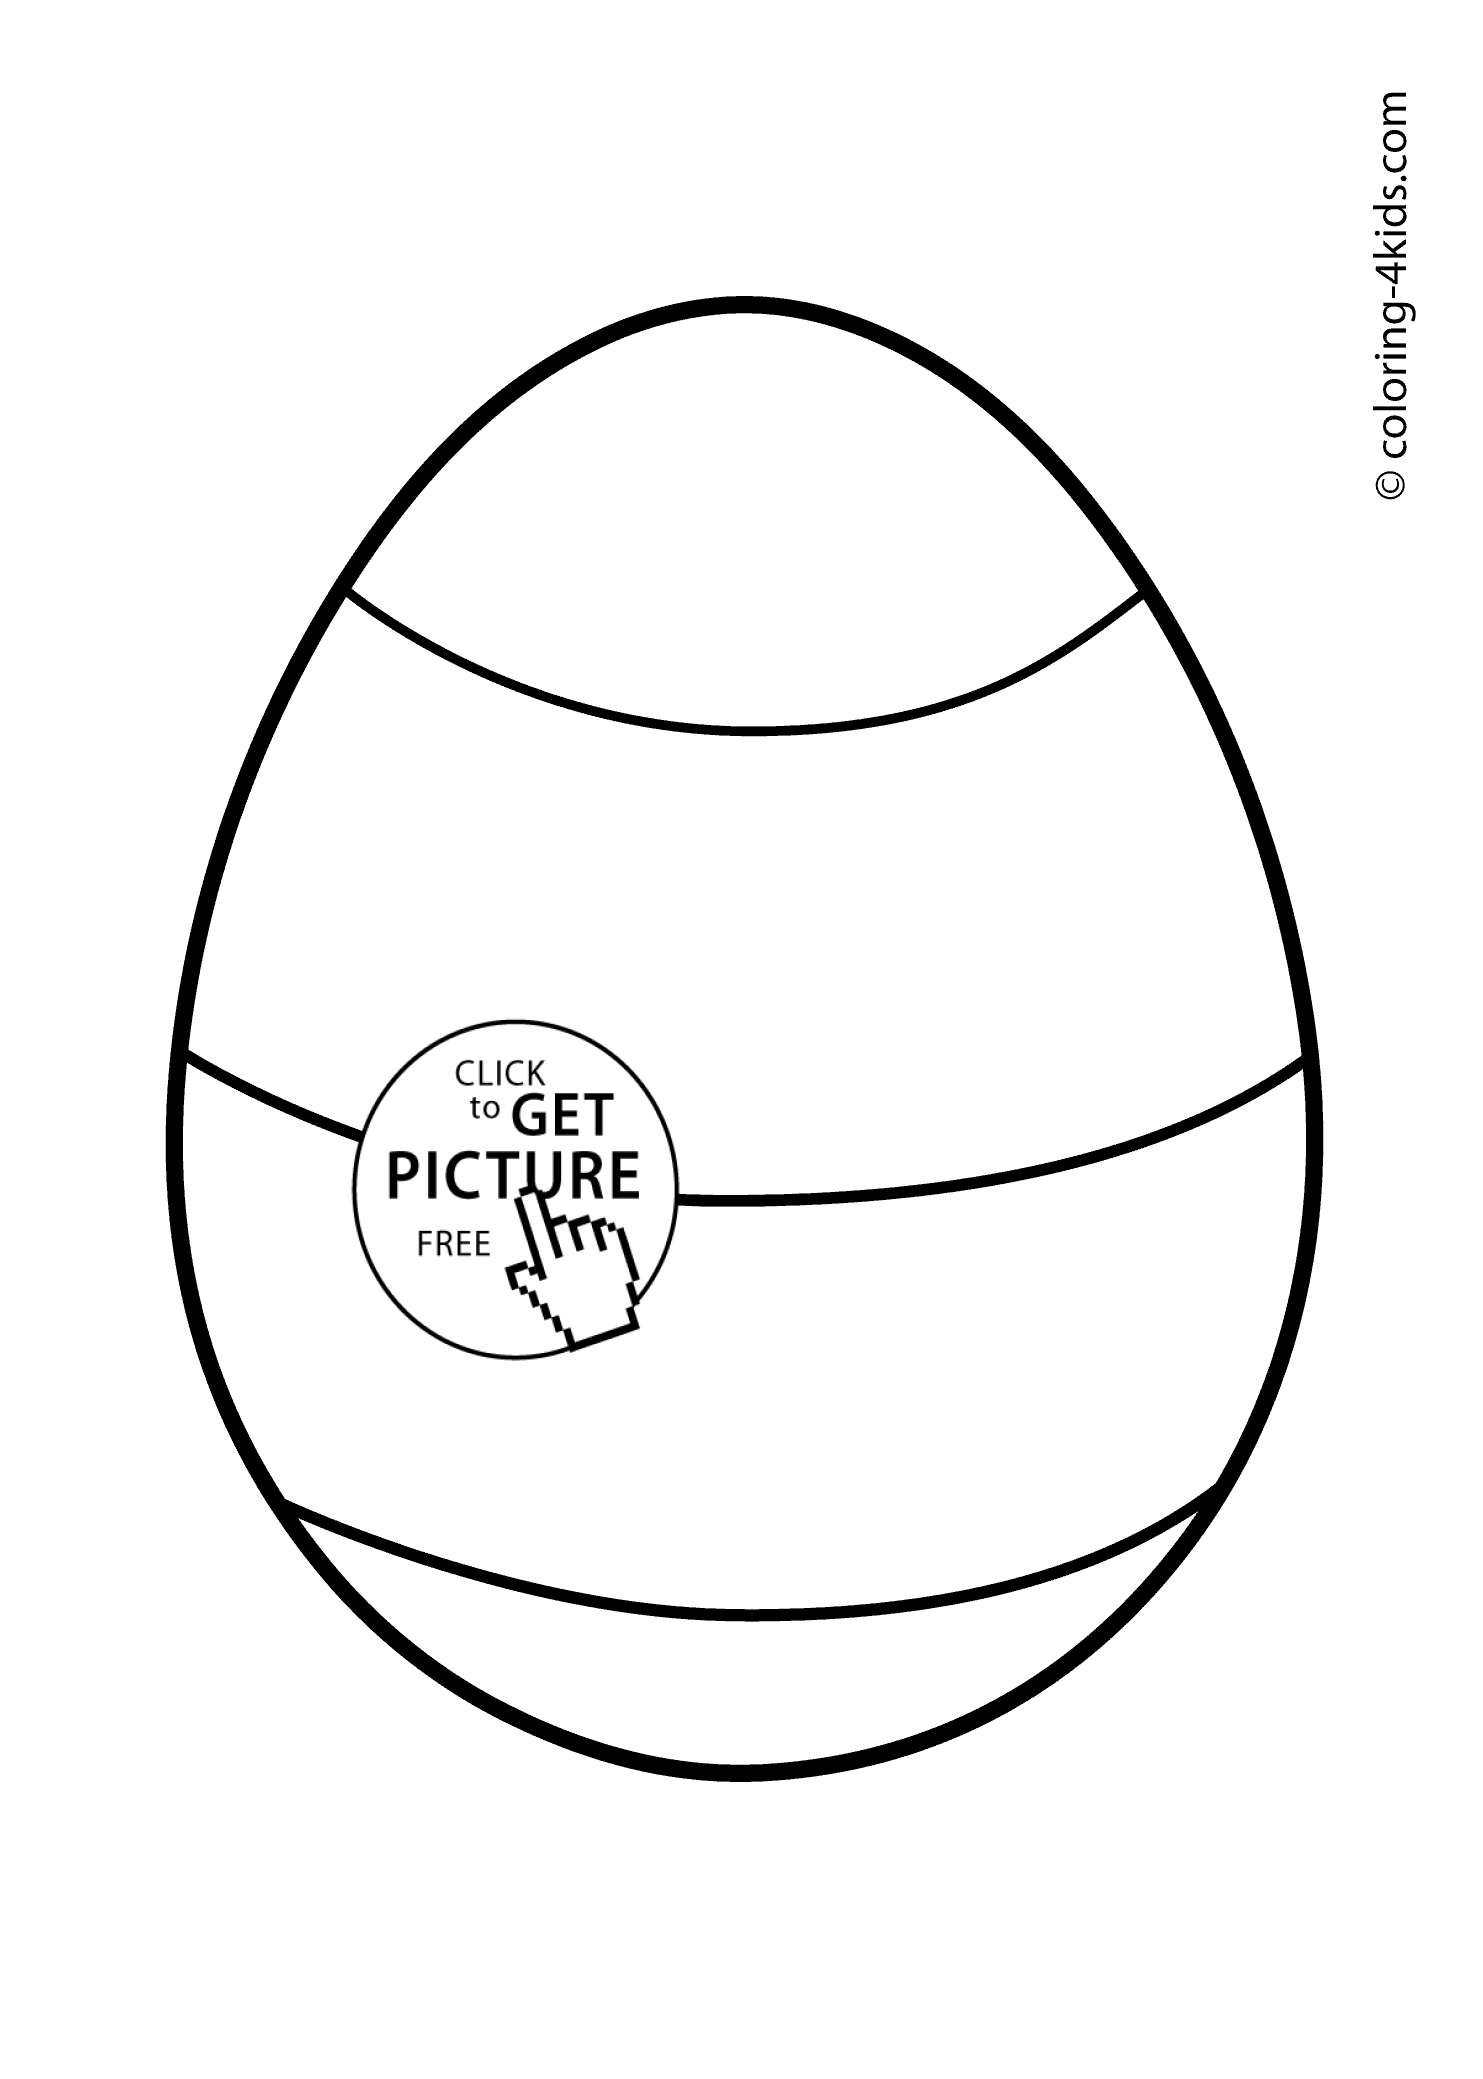 Easter Egg Coloring Page Easter Egg Coloring Pages For Kids Prinables 04 Coloing 4kids